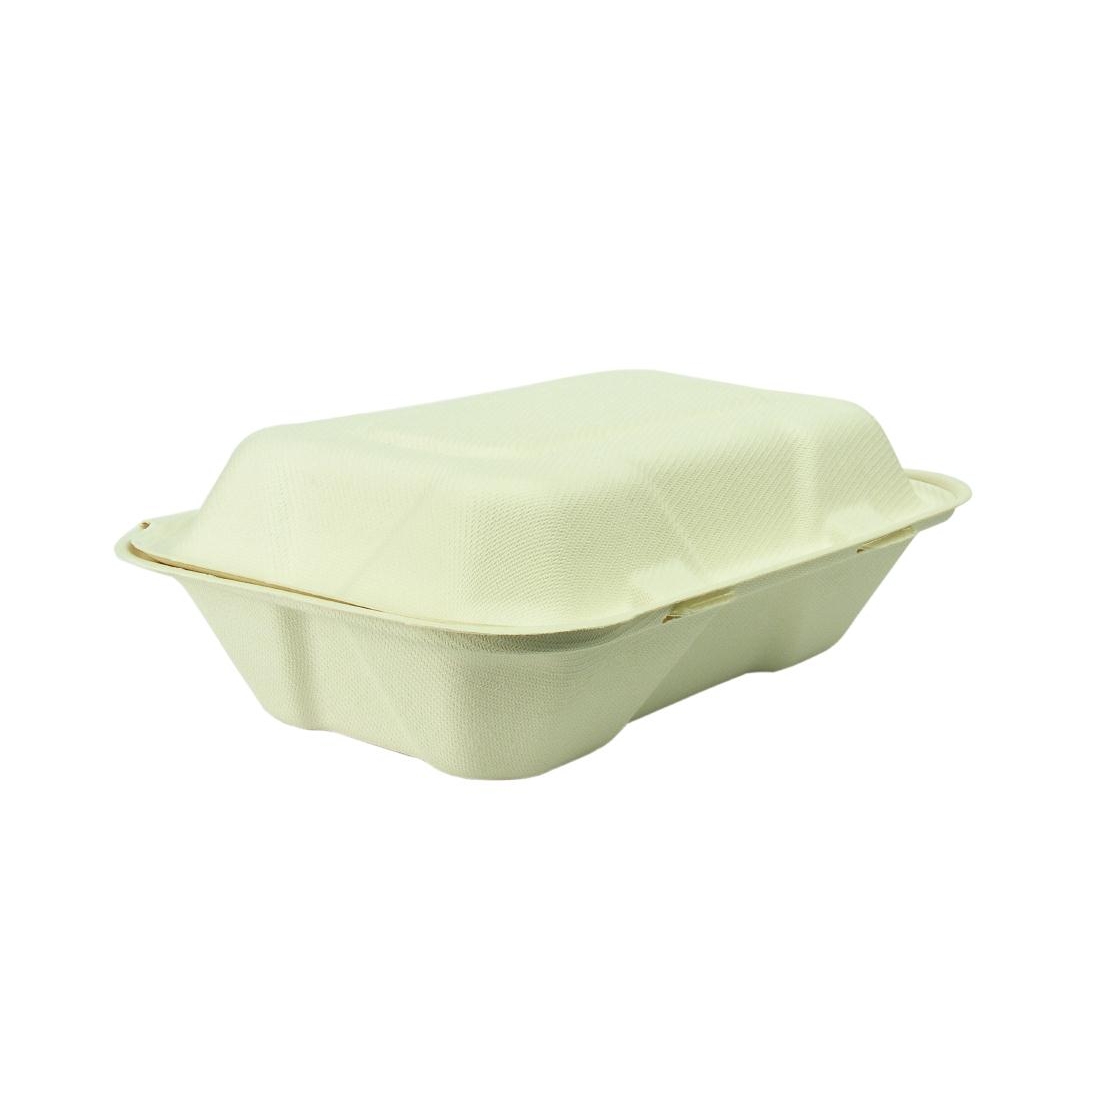 Vegware Compostable Clamshell Hinged Meal Boxes